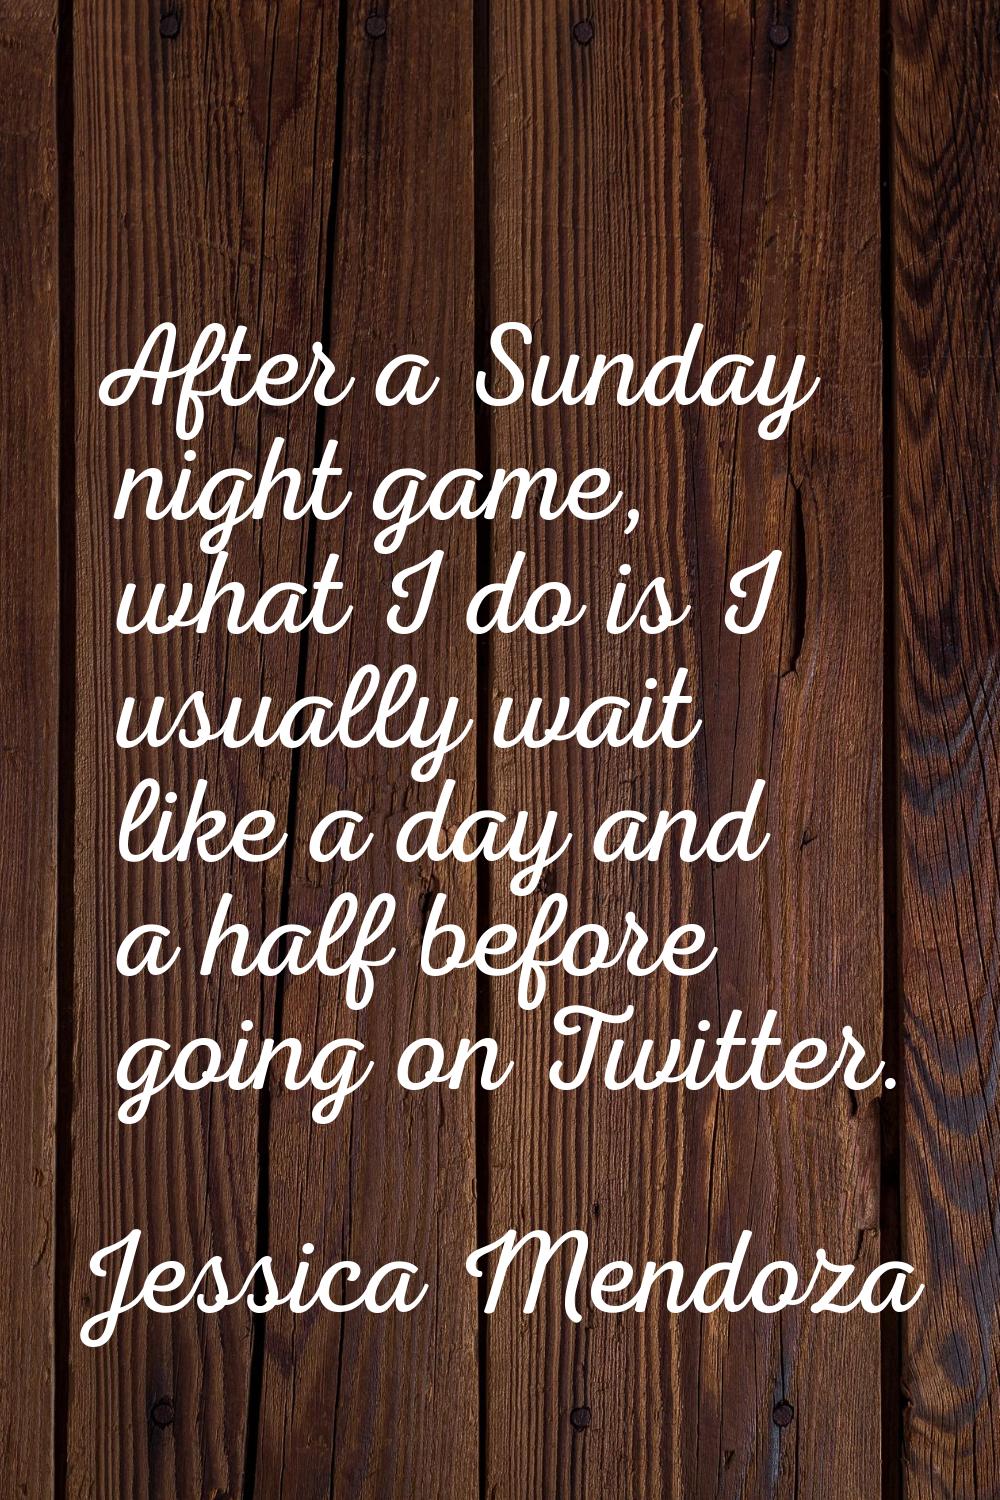 After a Sunday night game, what I do is I usually wait like a day and a half before going on Twitte